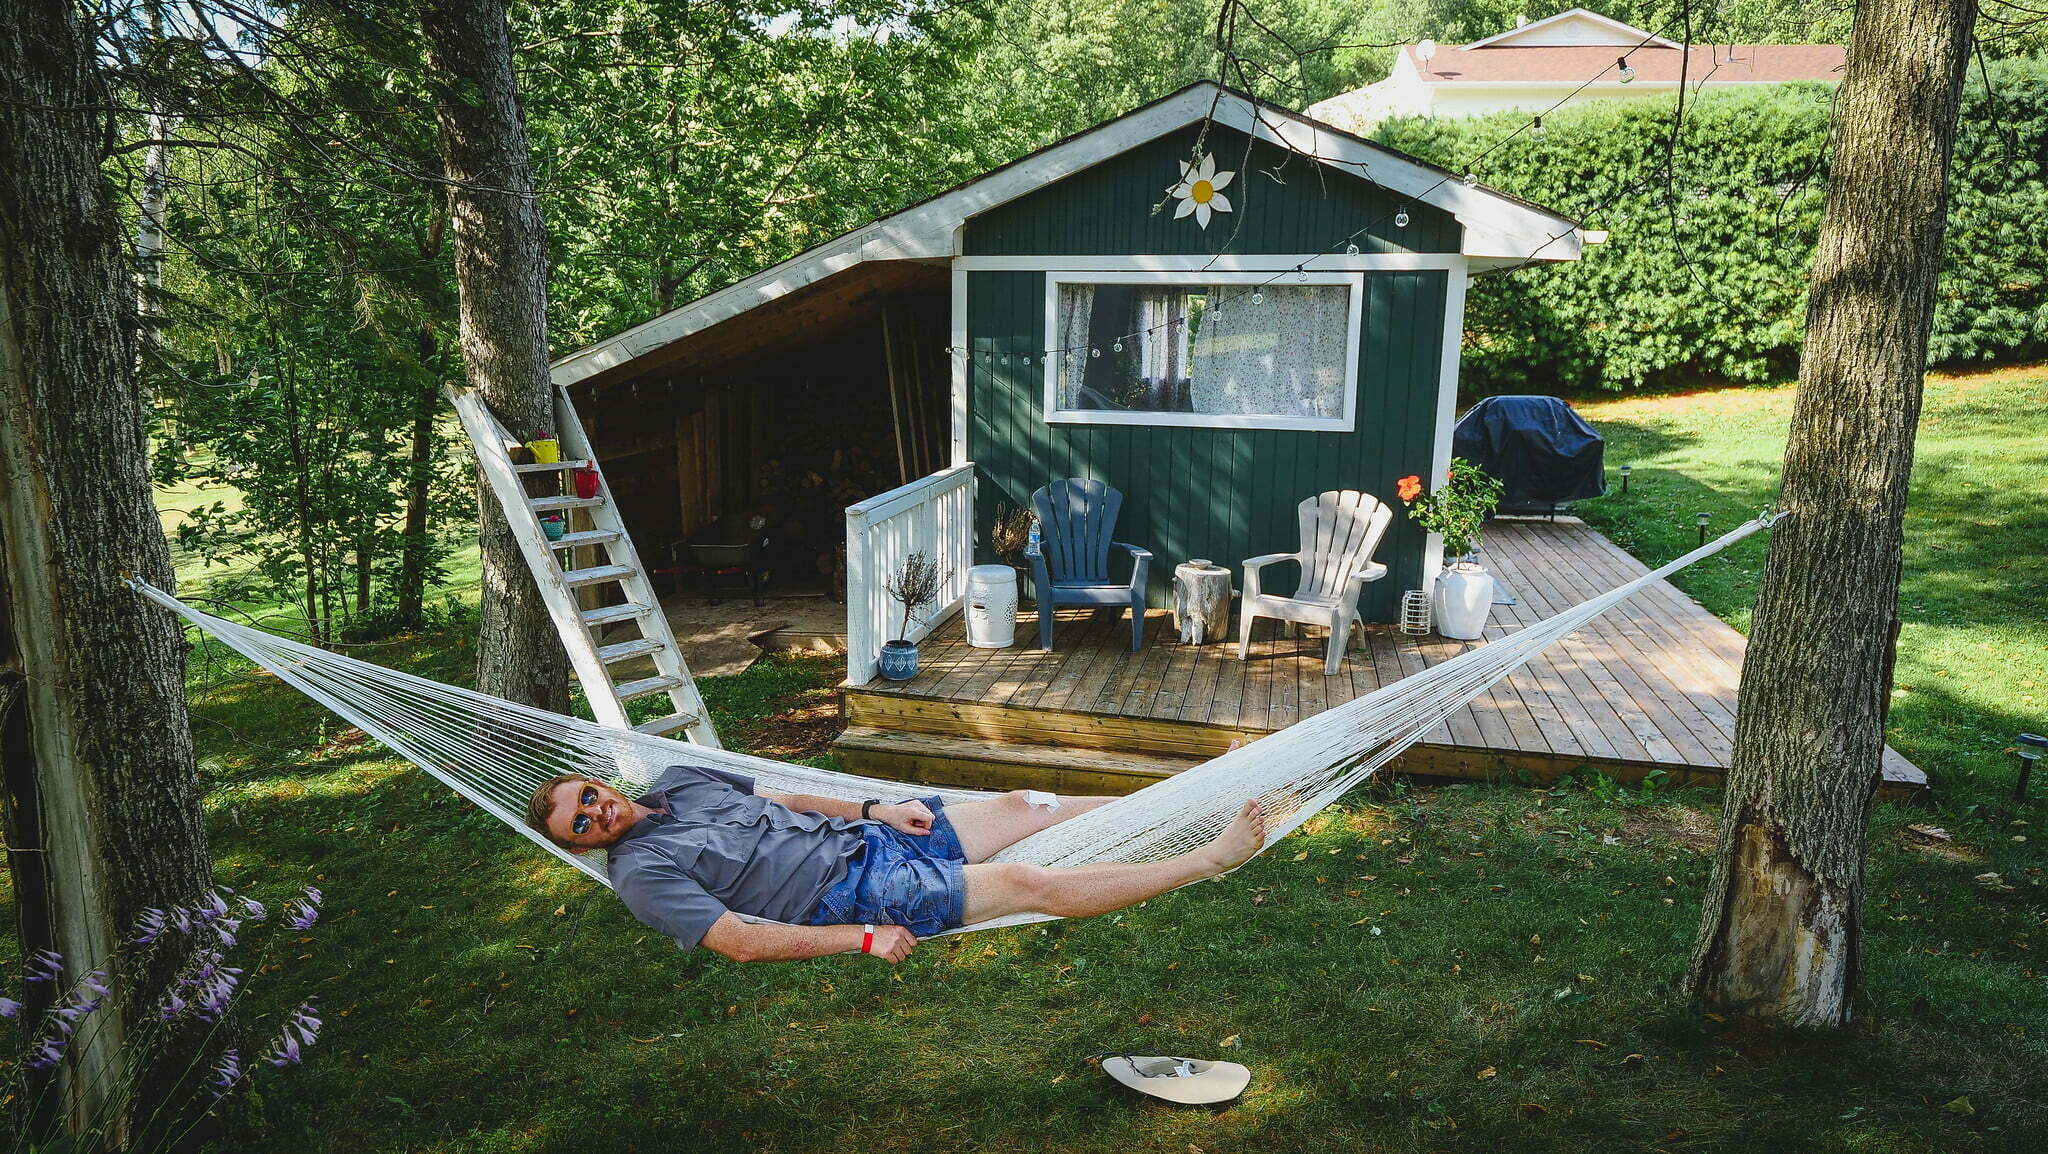 Nomadic Samuel chilling out in New Brunswick, Canada while visiting a tiny house for a weekend getaway